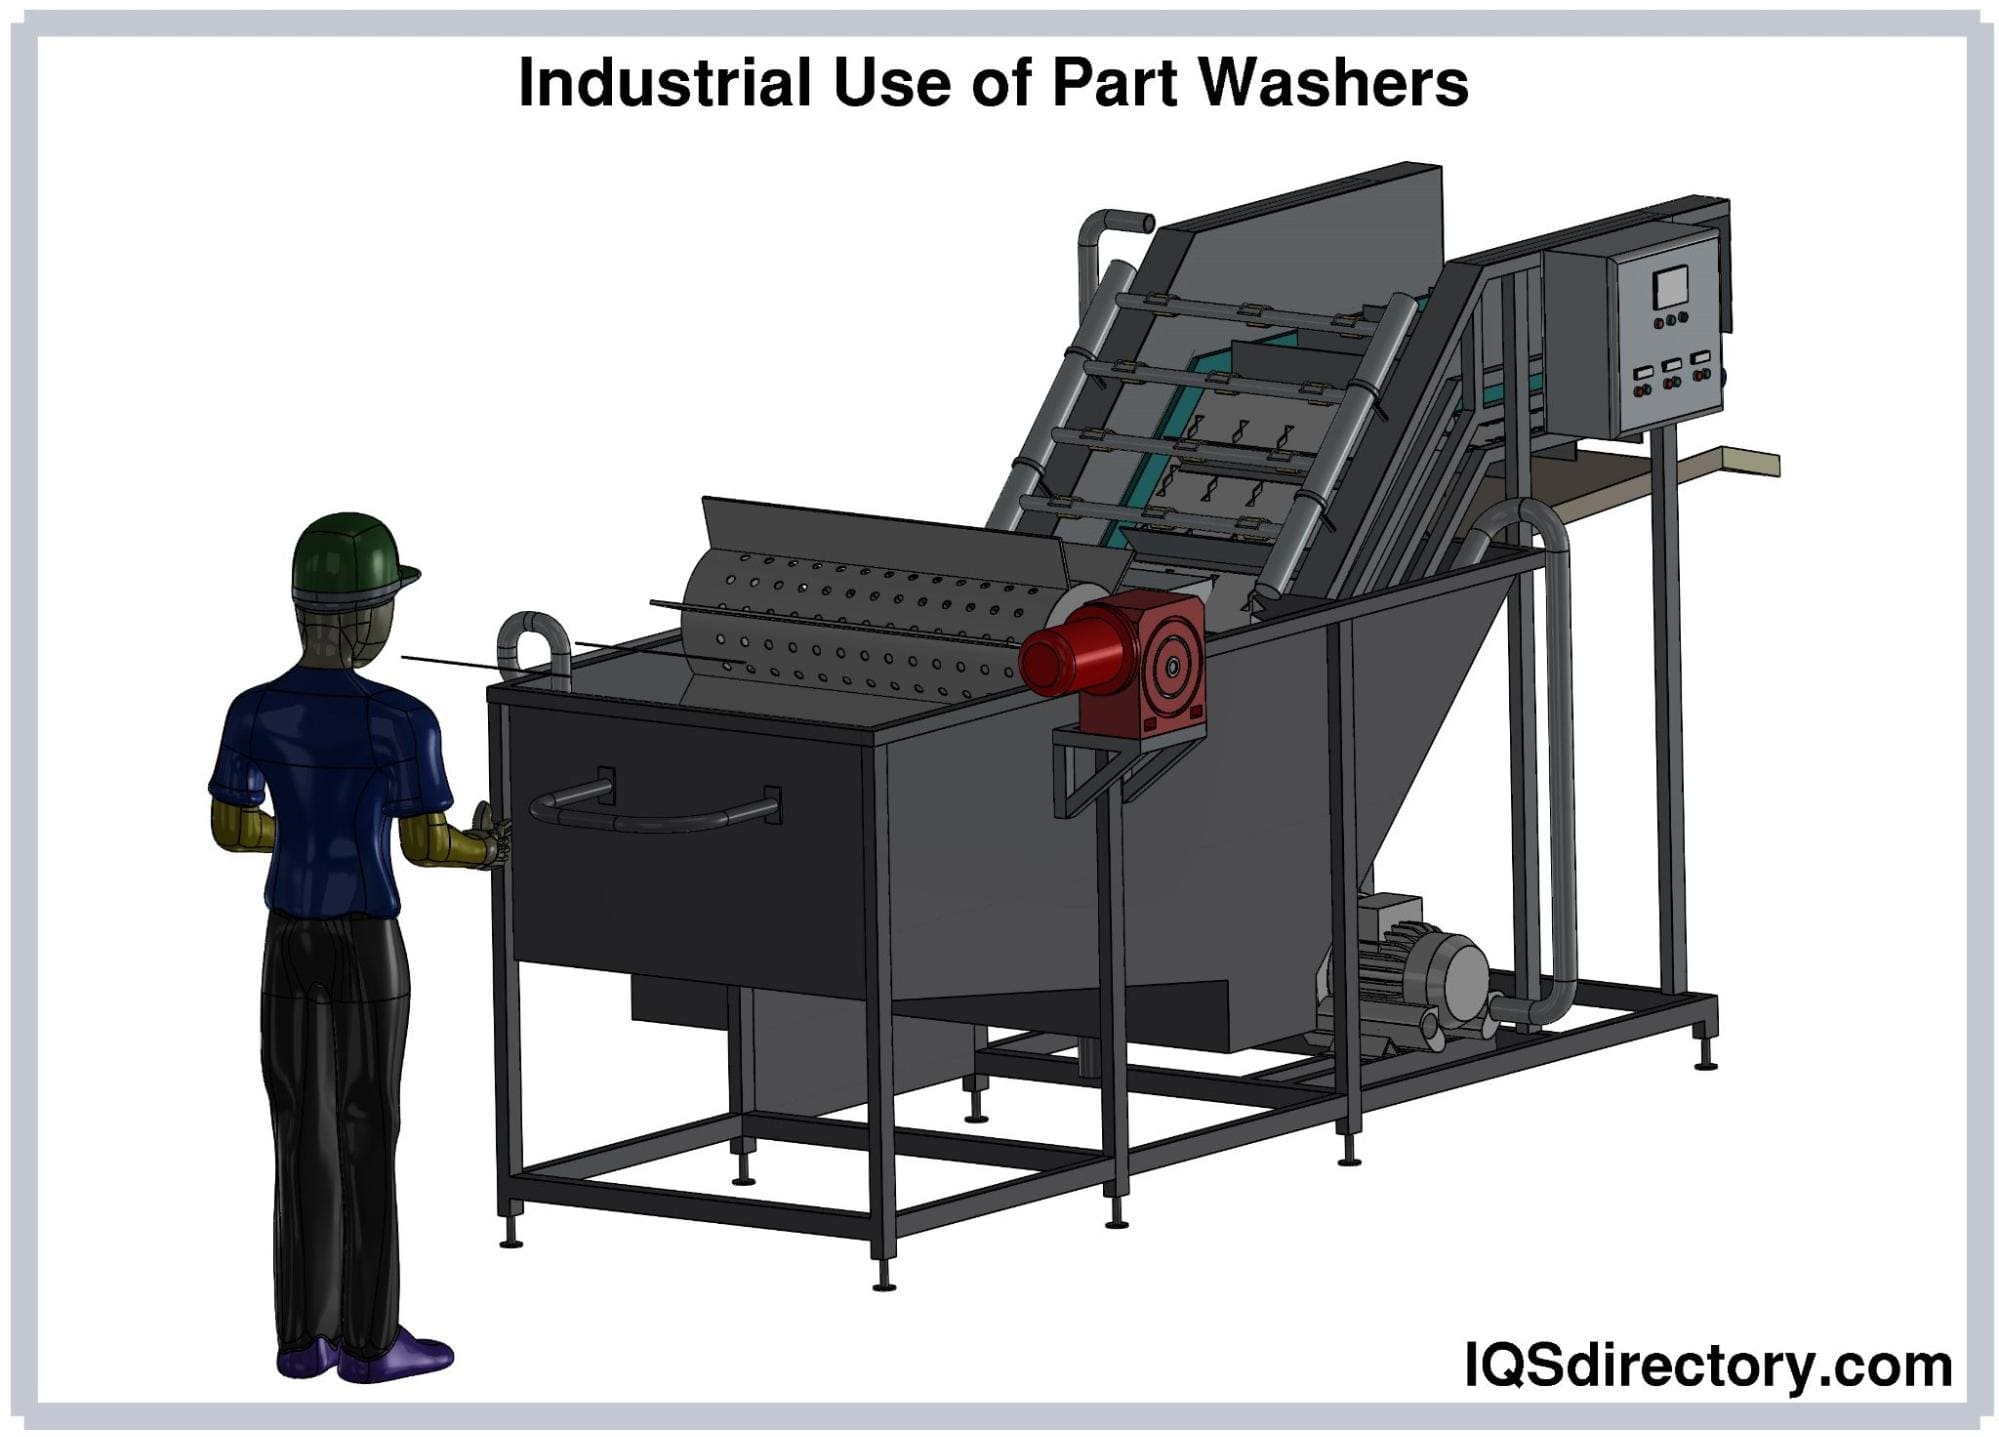 Industrial Use of Part Washers